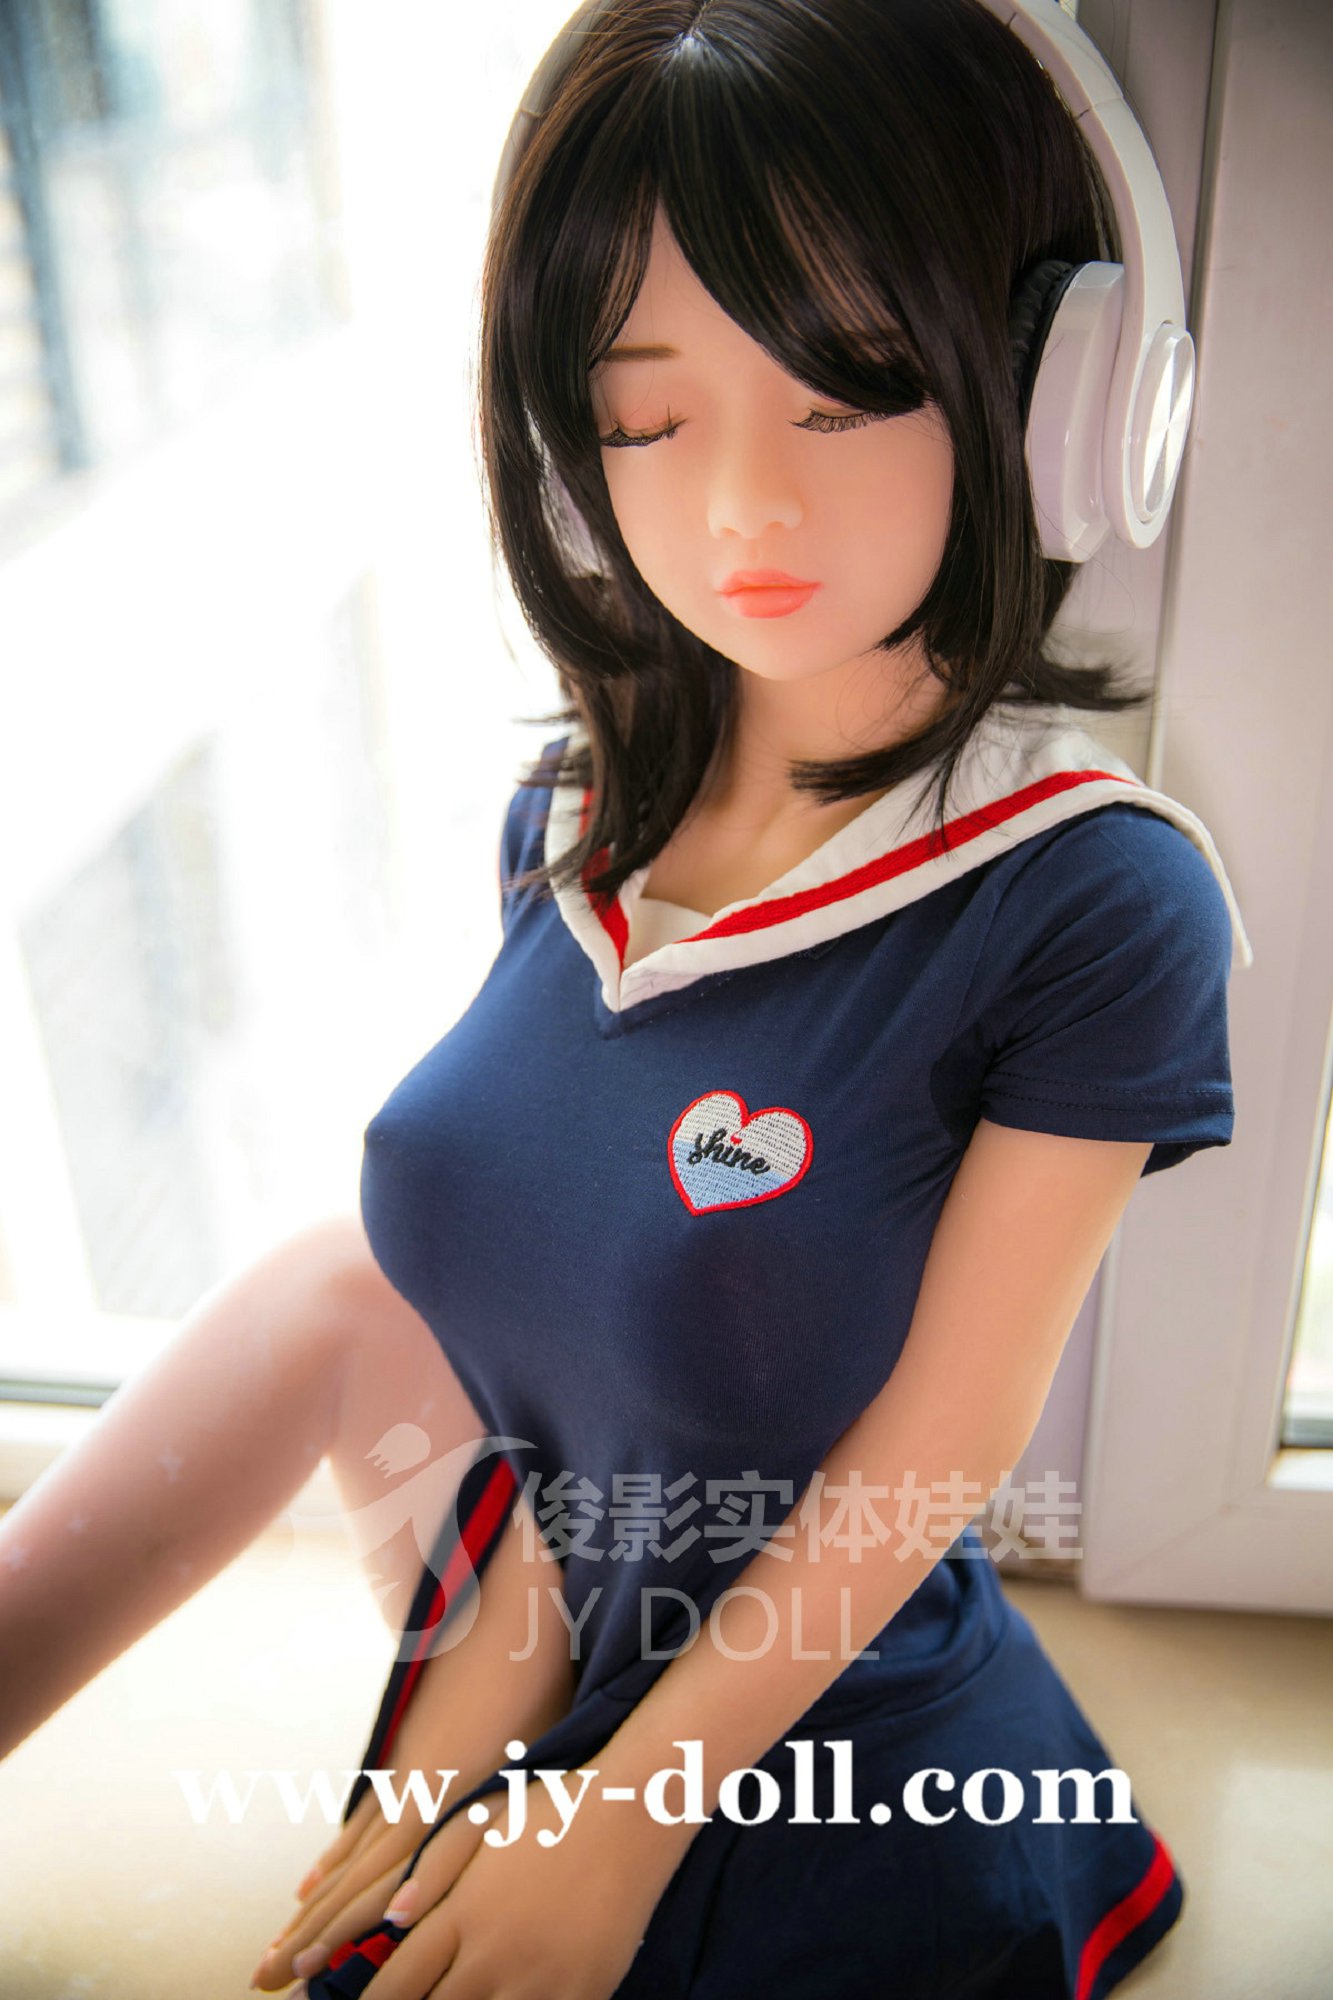 JY Doll 125cm TPE sex doll with big breasts Sonia